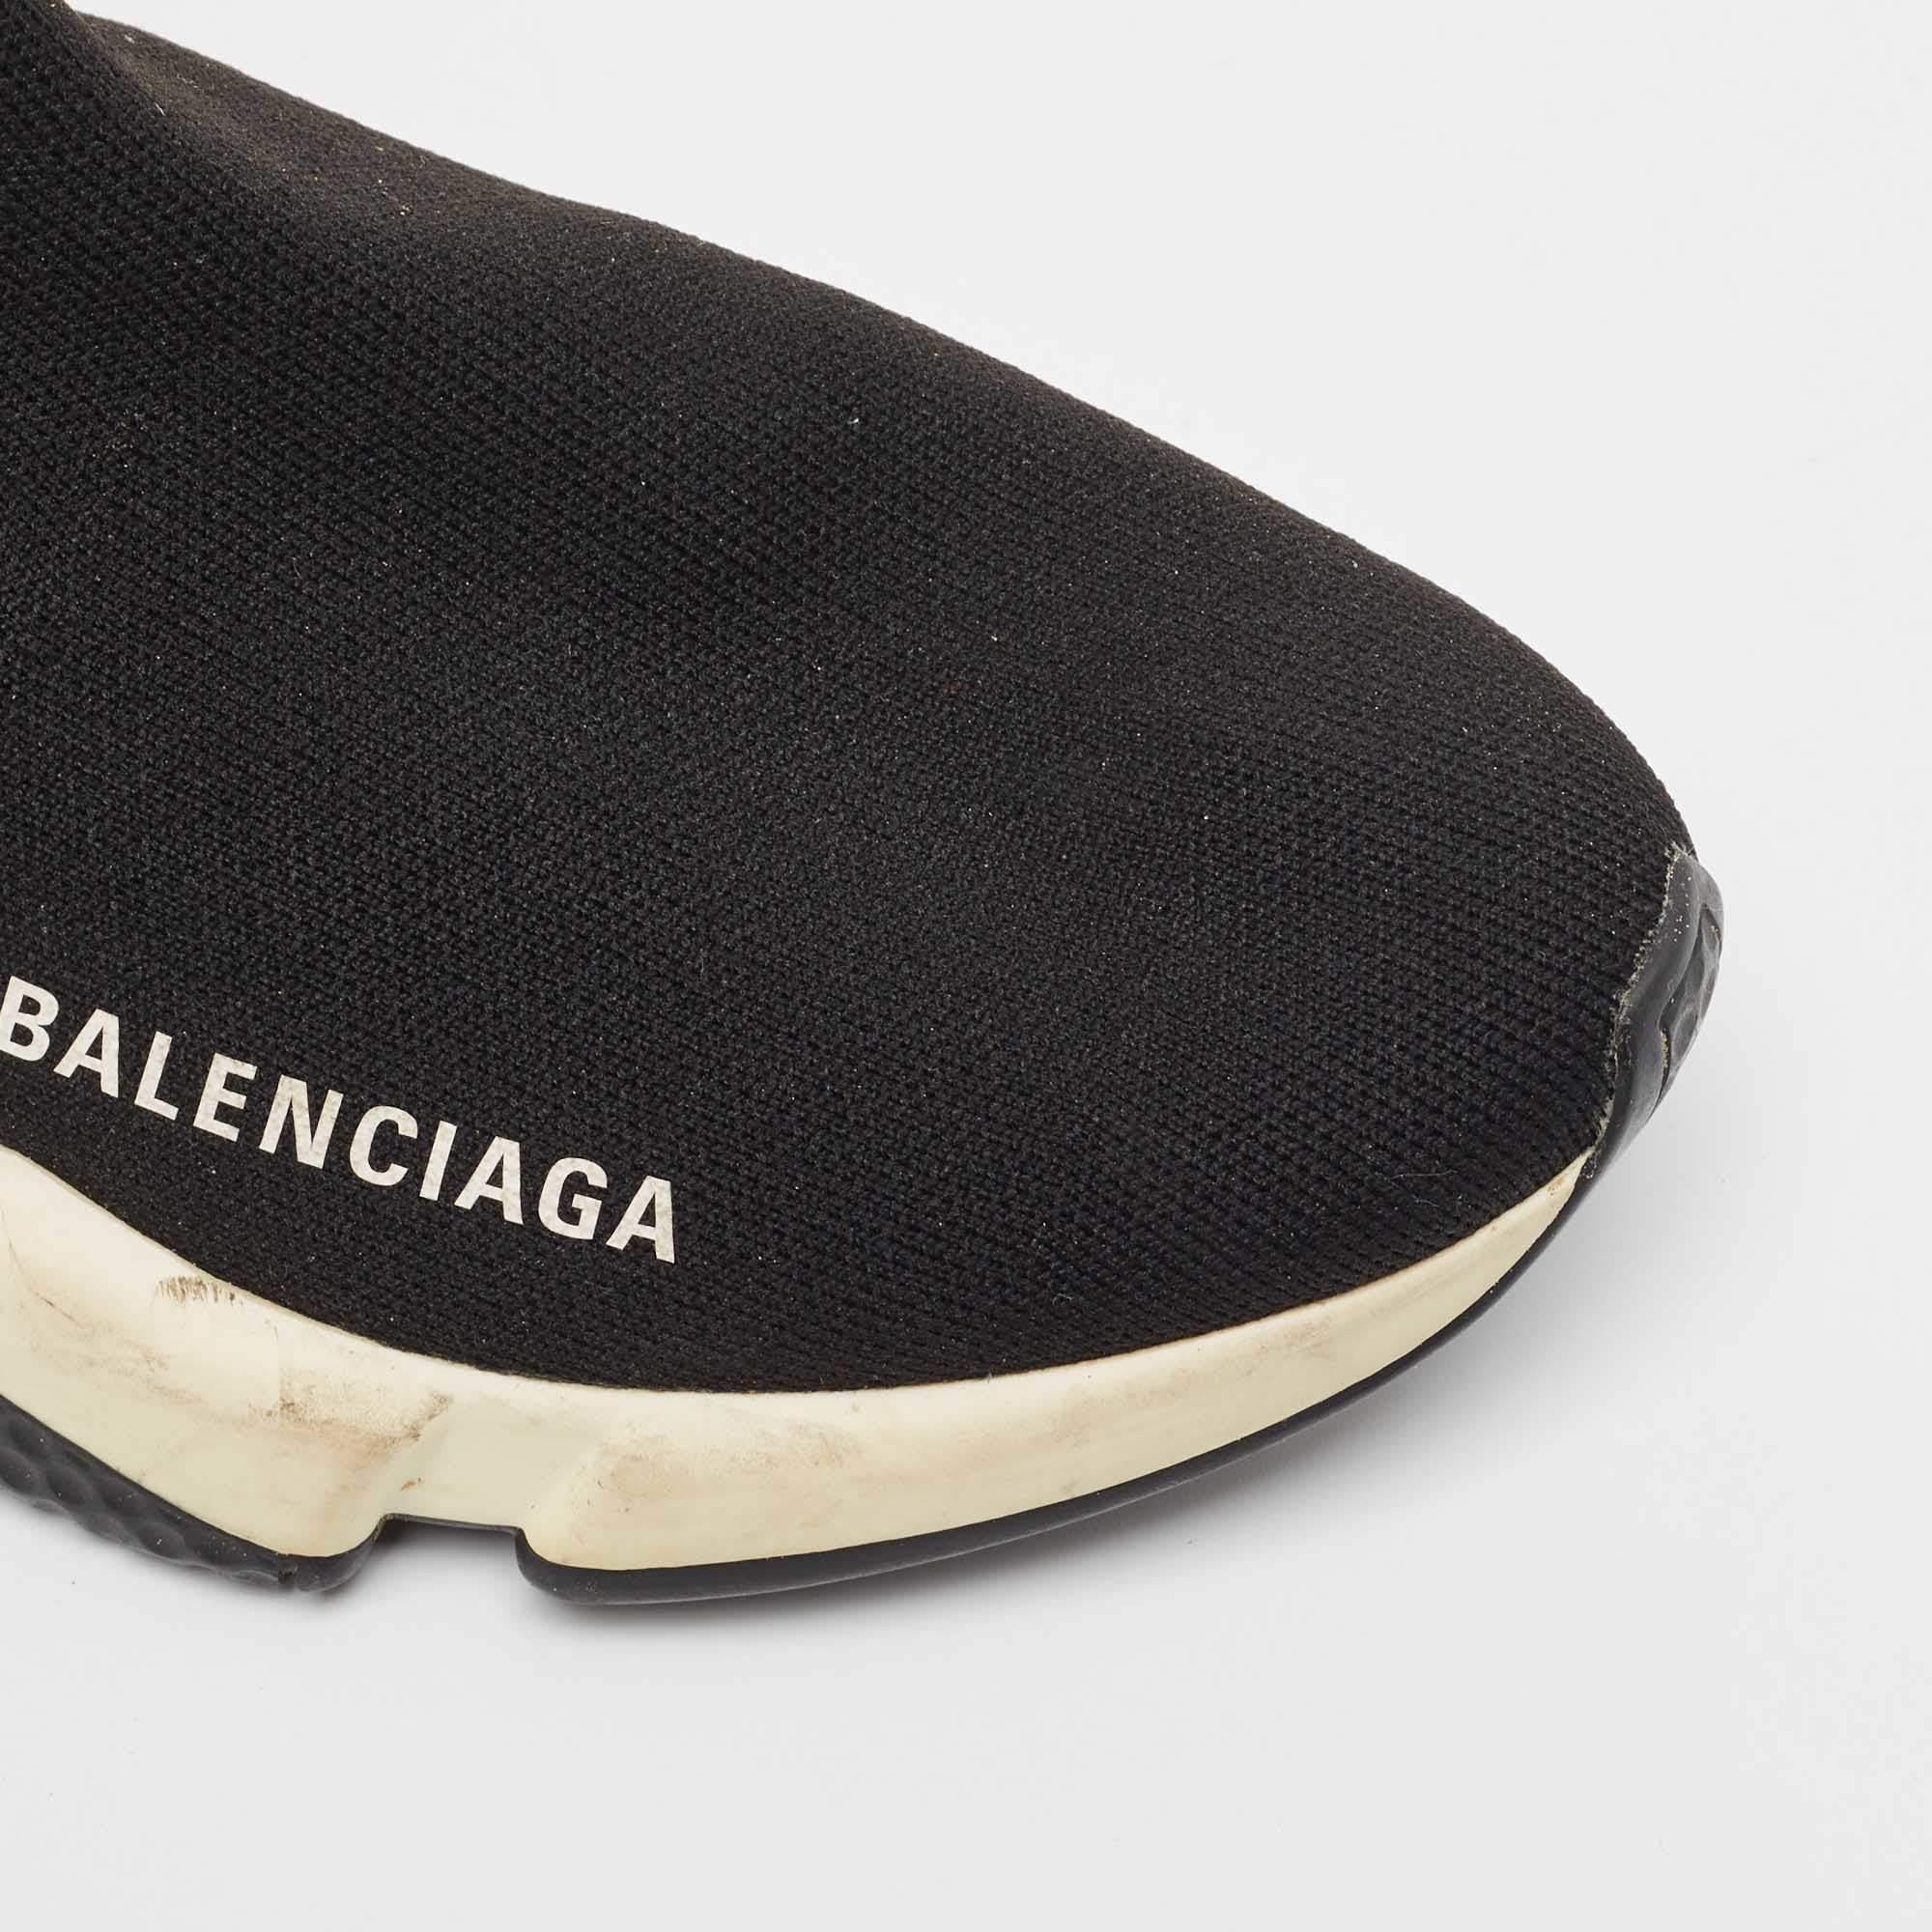 Balenciaga Black Knit Fabric Speed Trainer Sneakers Size 37 For Sale 3